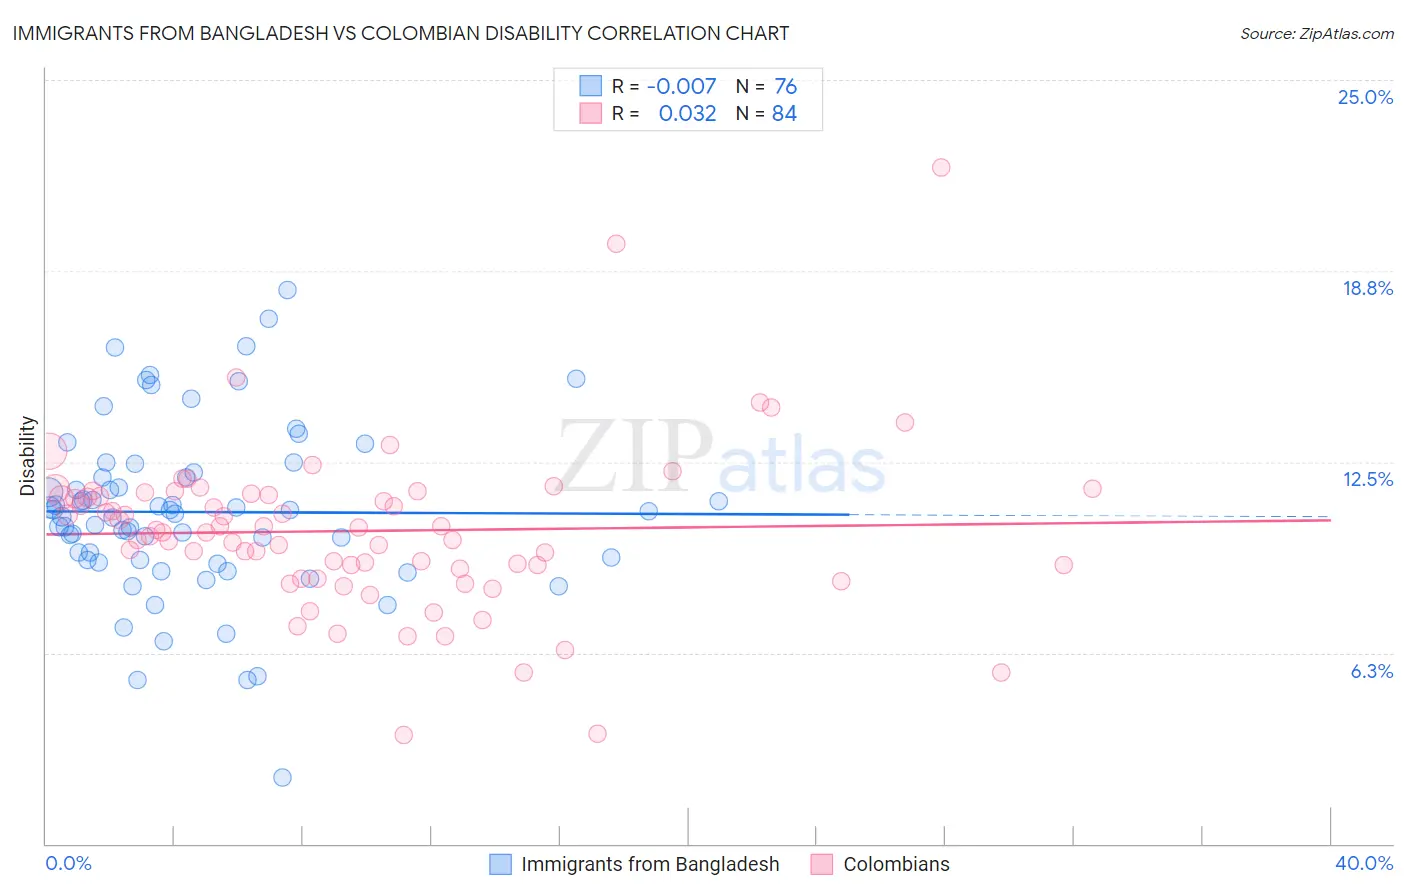 Immigrants from Bangladesh vs Colombian Disability